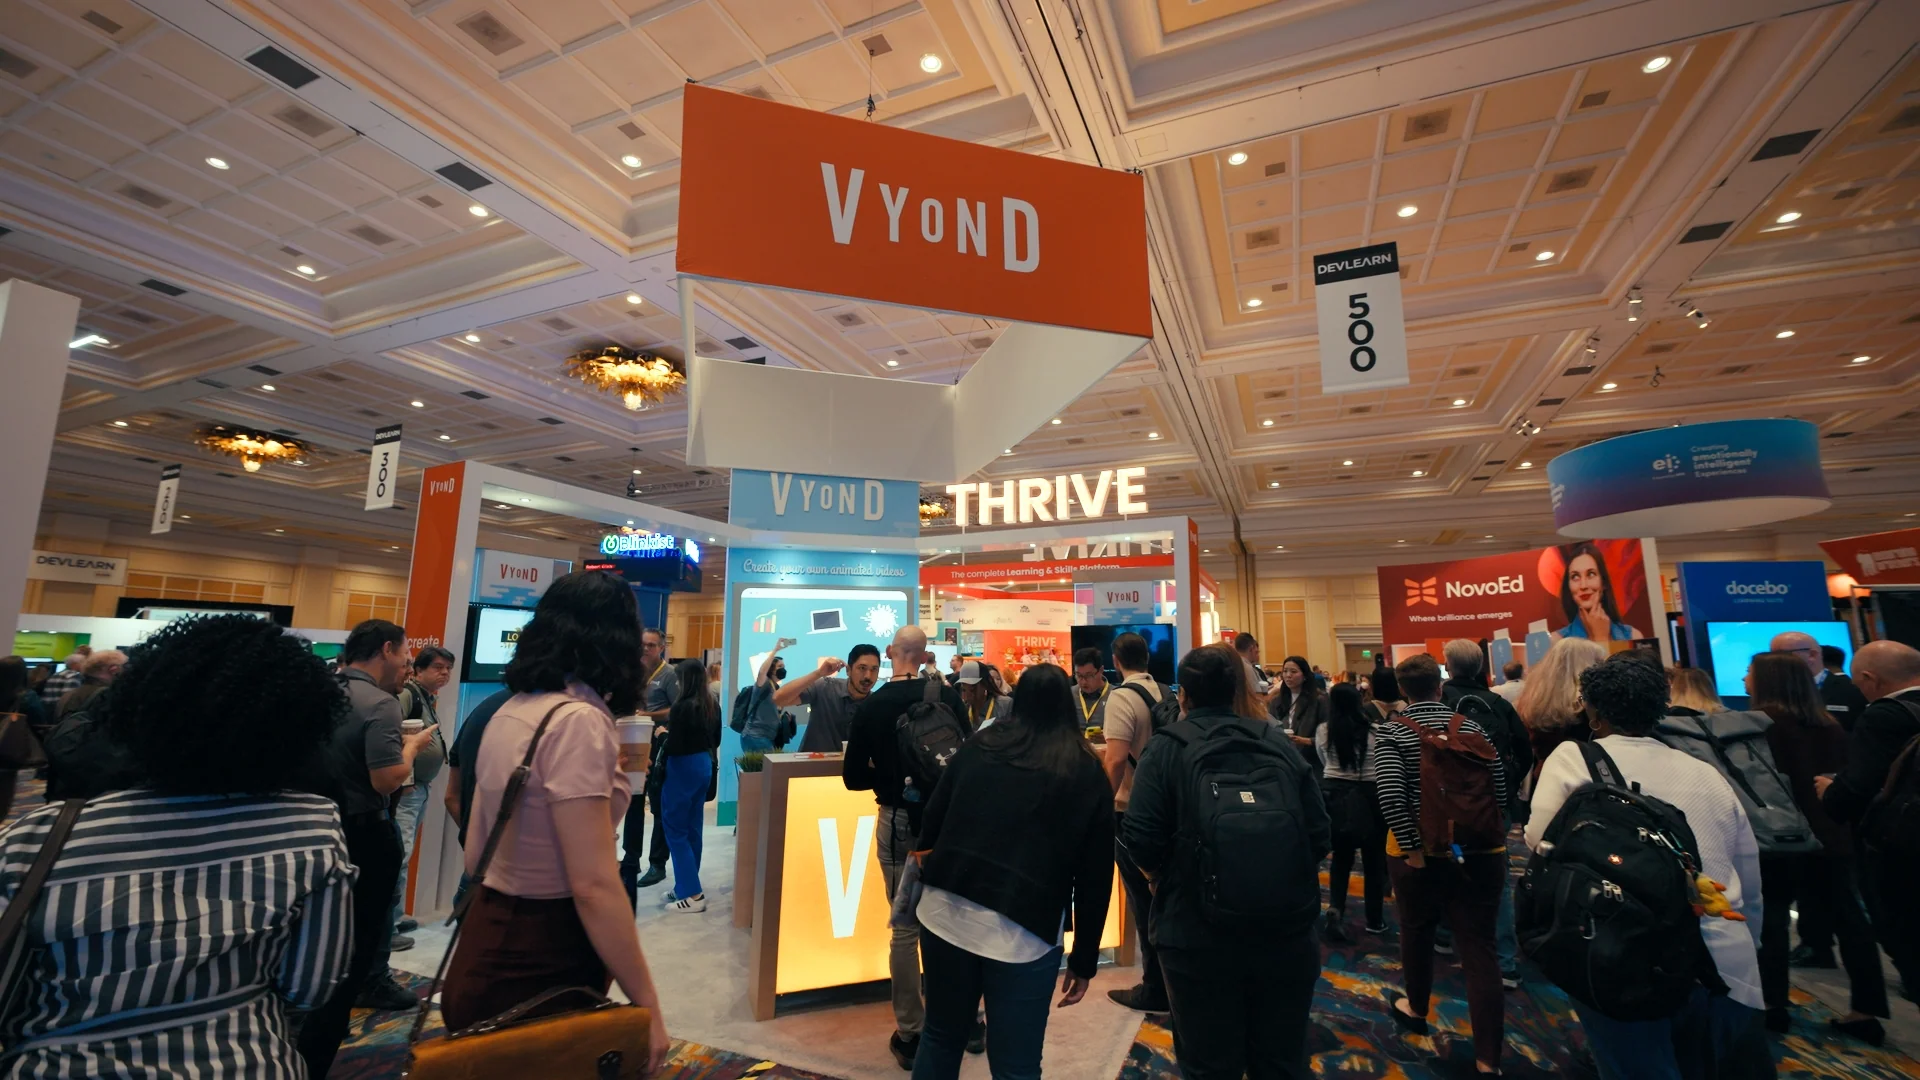 Vyond's booth at DevLearn 2022